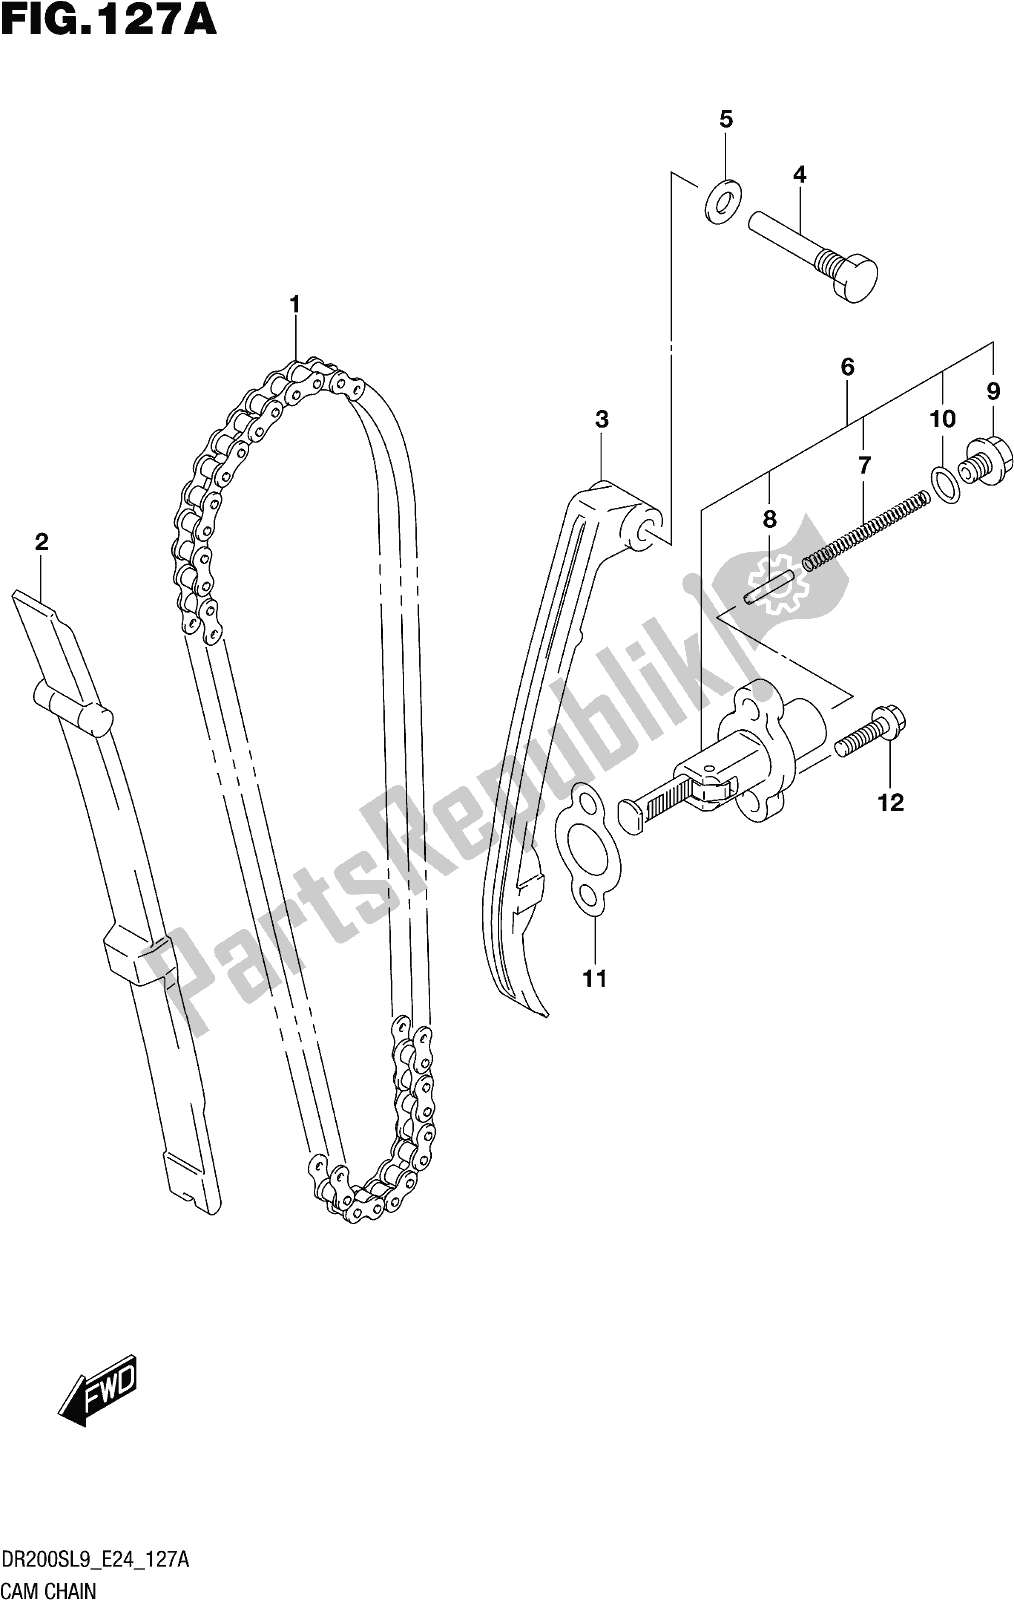 All parts for the Fig. 127a Cam Chain of the Suzuki DR 200S 2019